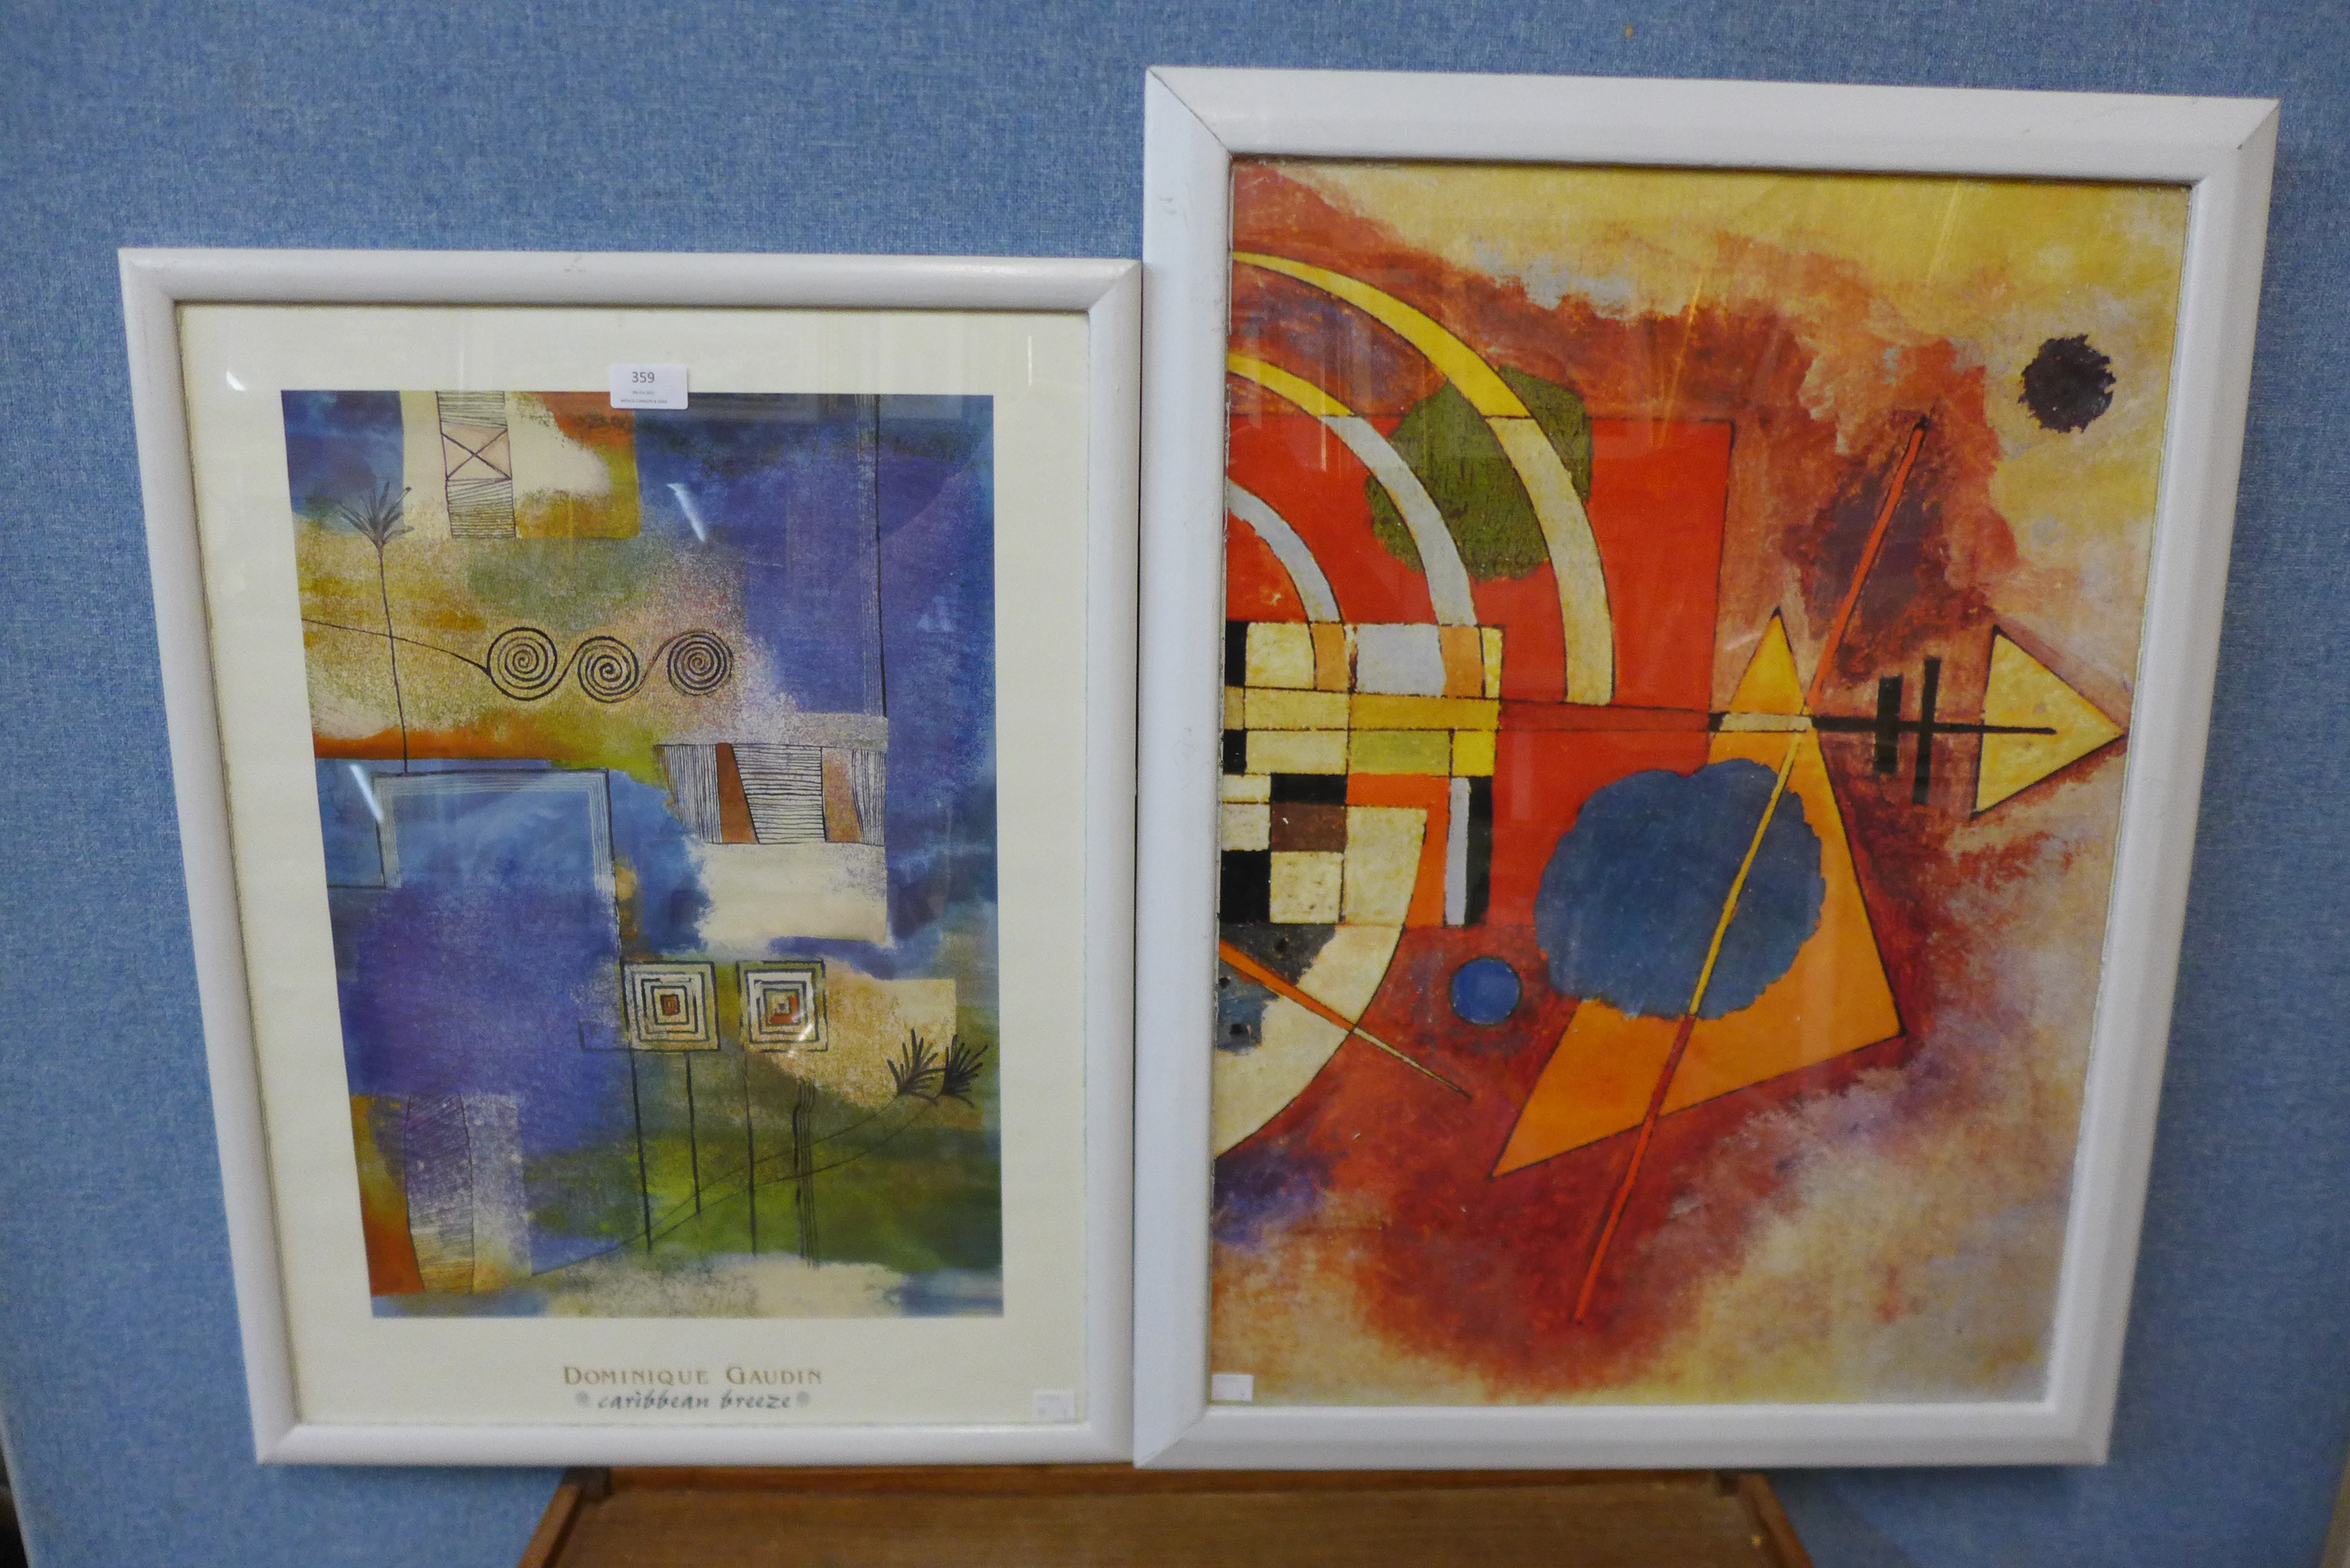 A Domonique Gaudin print and another abstract print, framed